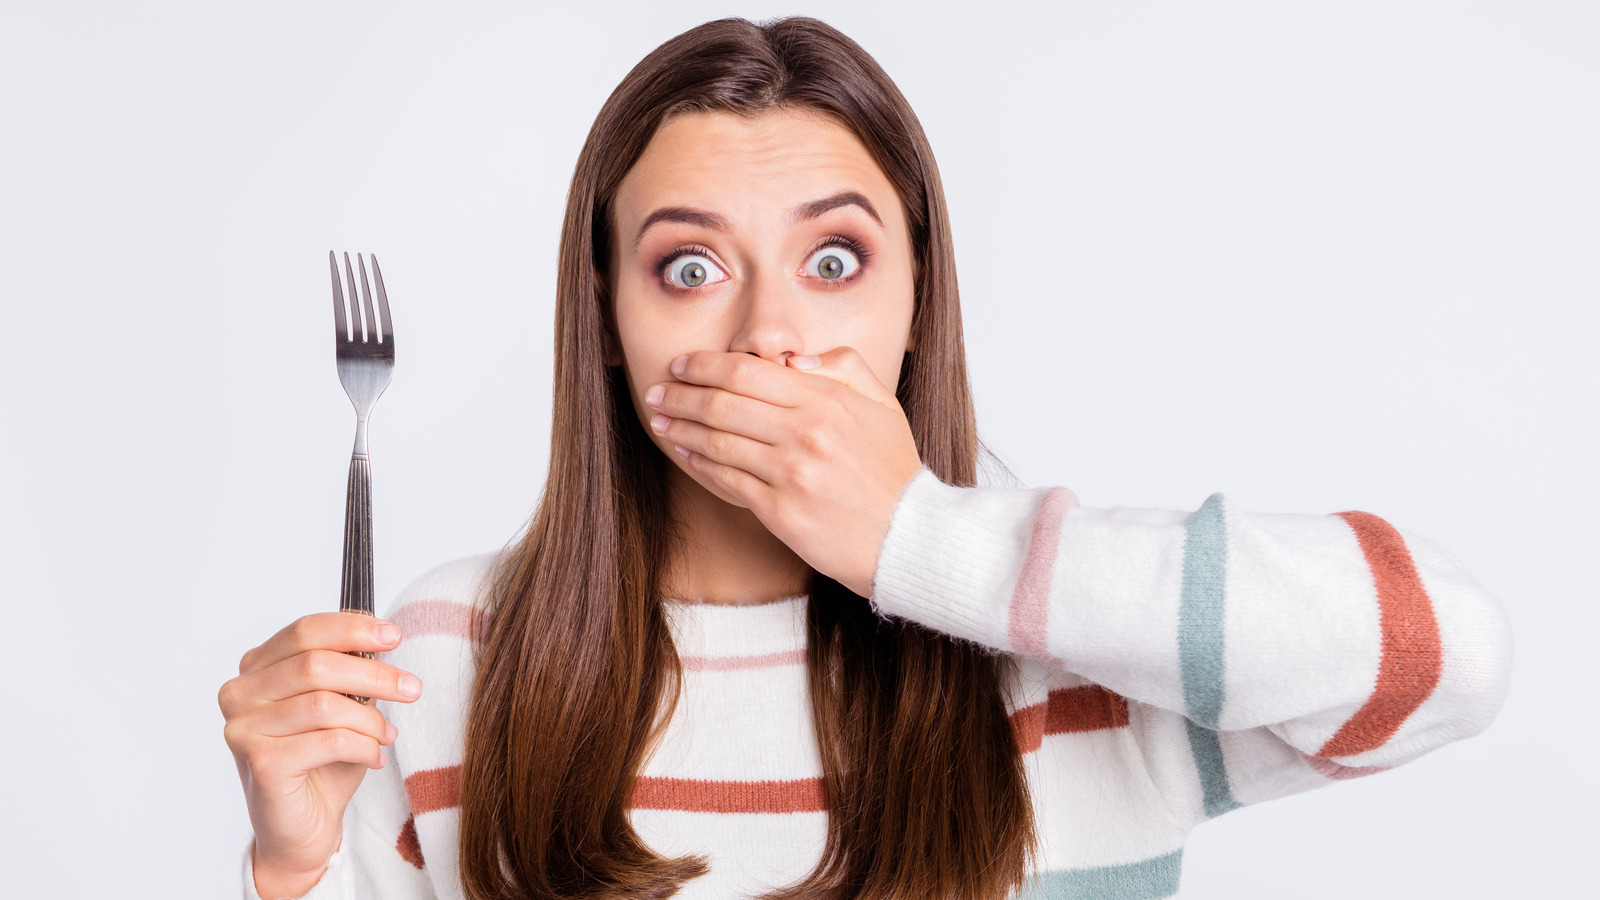 Is Accidentally Swallowing A Hair In Your Food Bad For You?